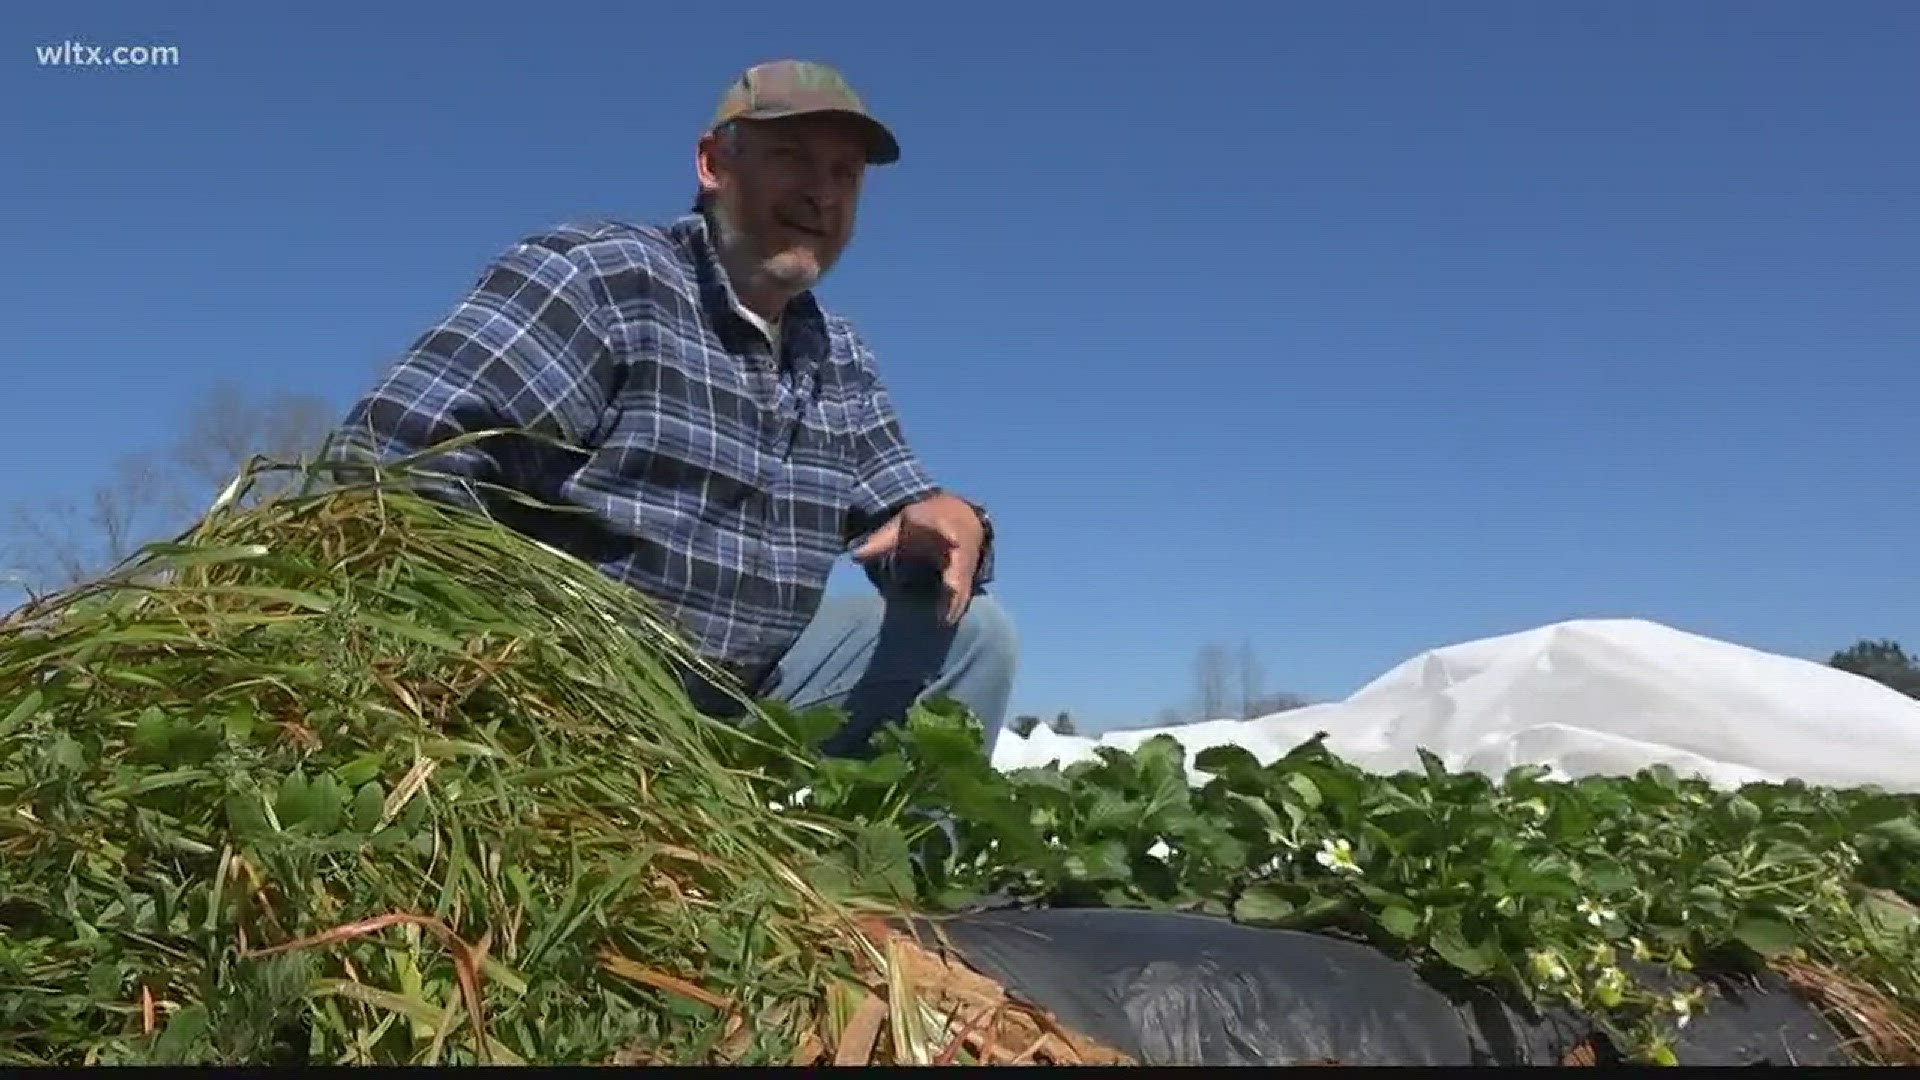 News19 talked to a farmer about battling South Carolina's unpredictable weather.